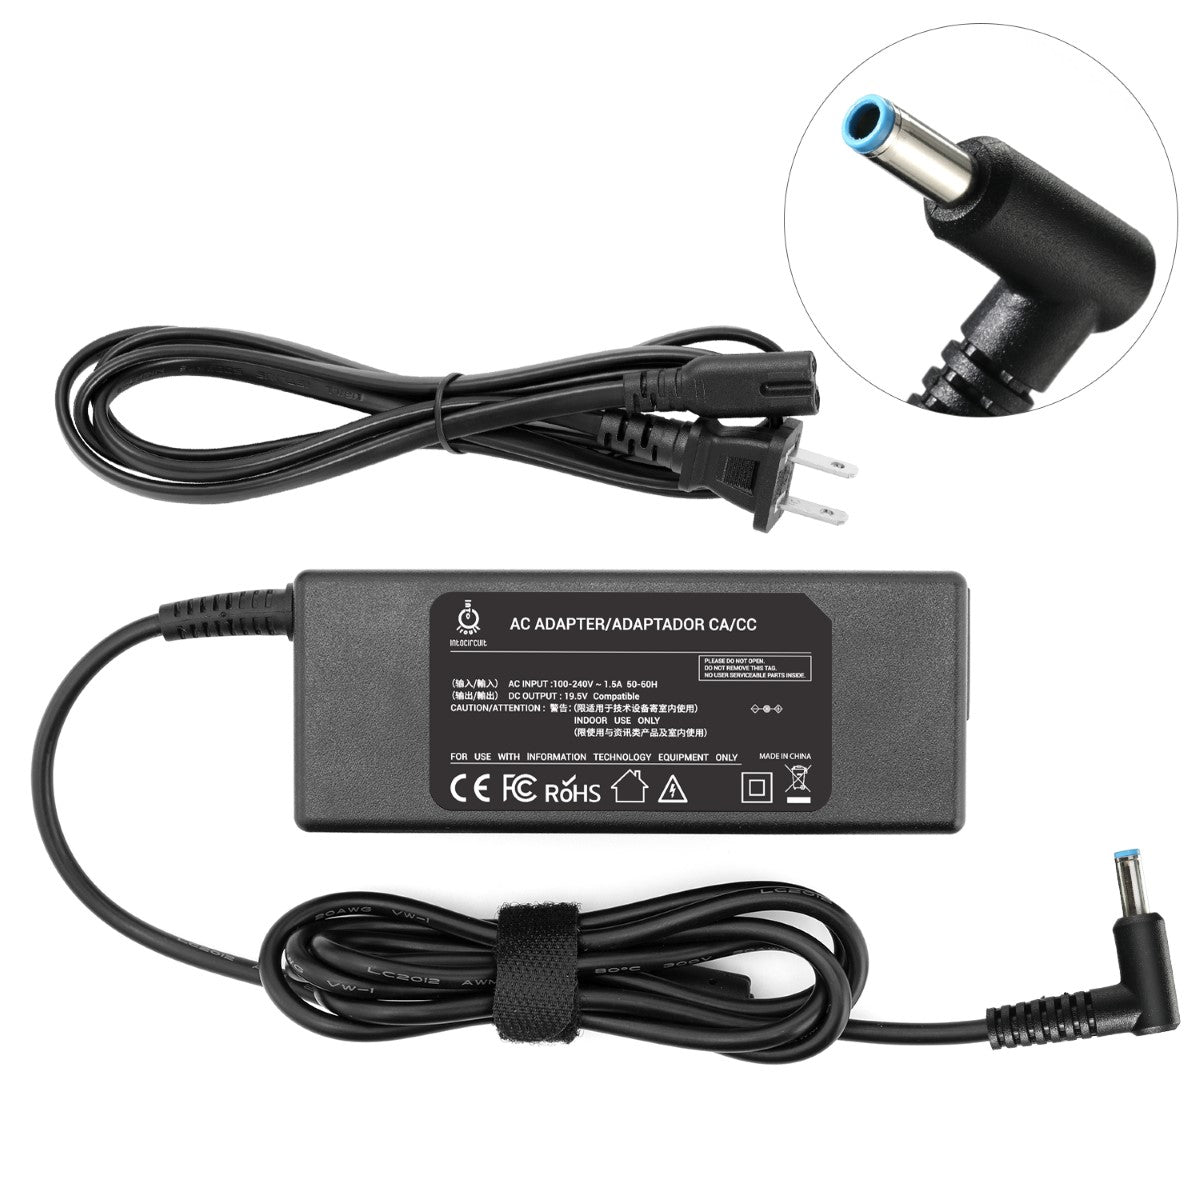 AC Adapter Charger for HP 15-ac010nr Notebook